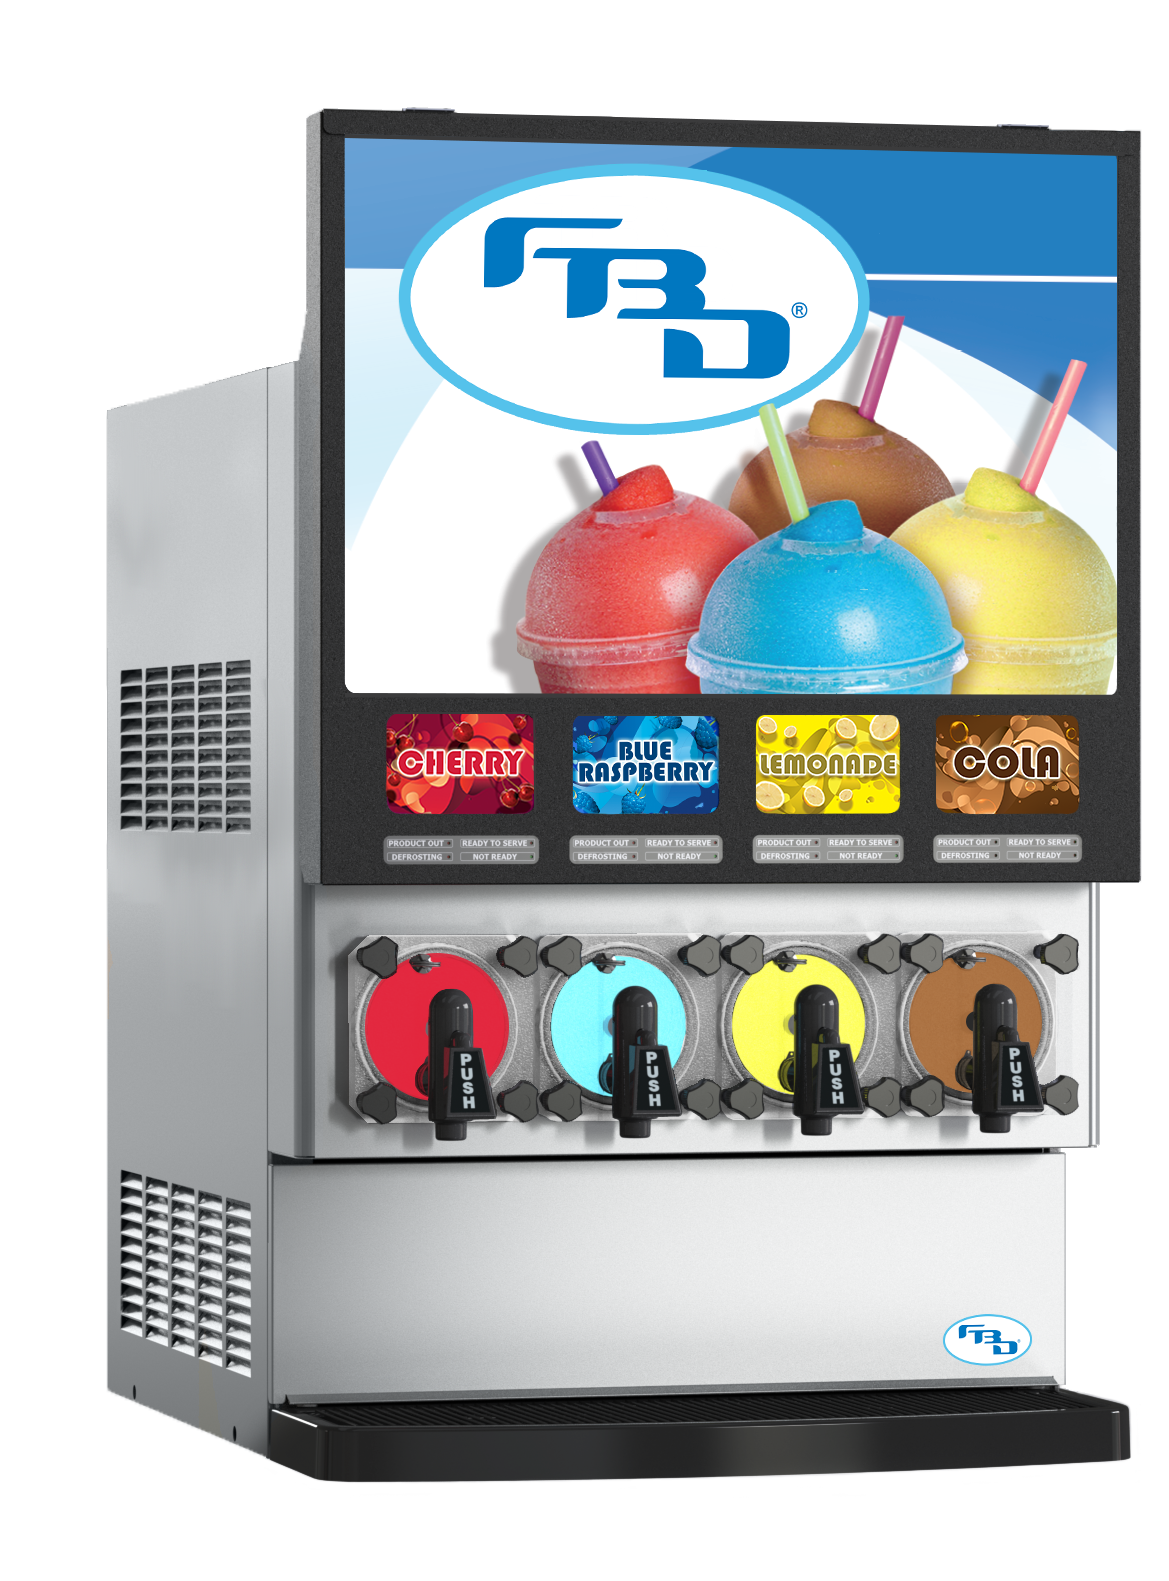 Customization is a Key Consideration When Selecting a Frozen Beverage Partner - featured image